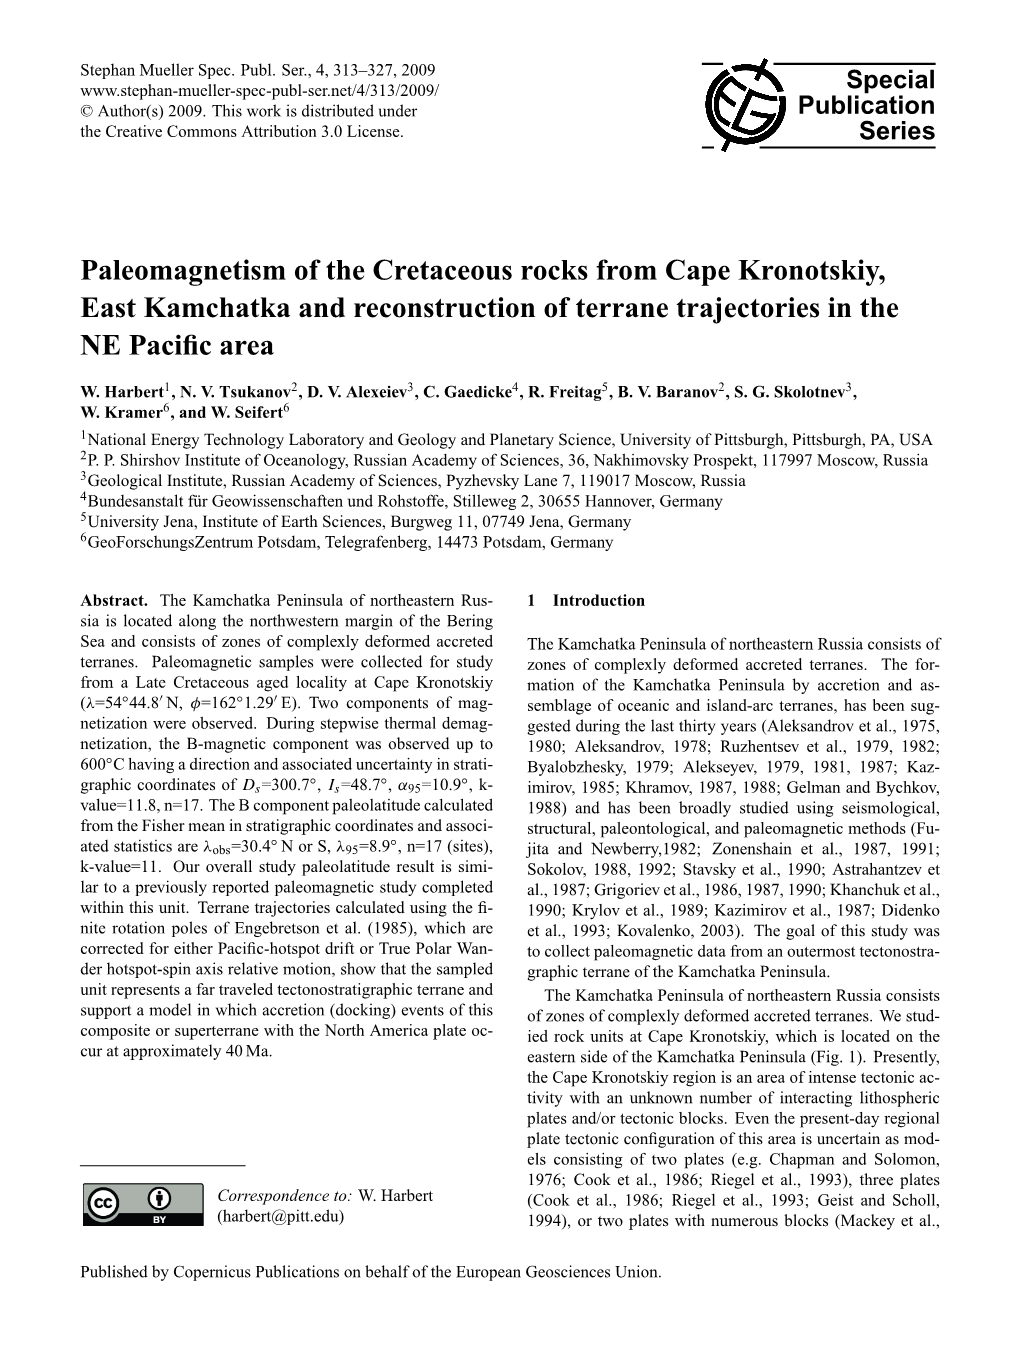 Paleomagnetism of the Cretaceous Rocks from Cape Kronotskiy, East Kamchatka and Reconstruction of Terrane Trajectories in the NE Paciﬁc Area